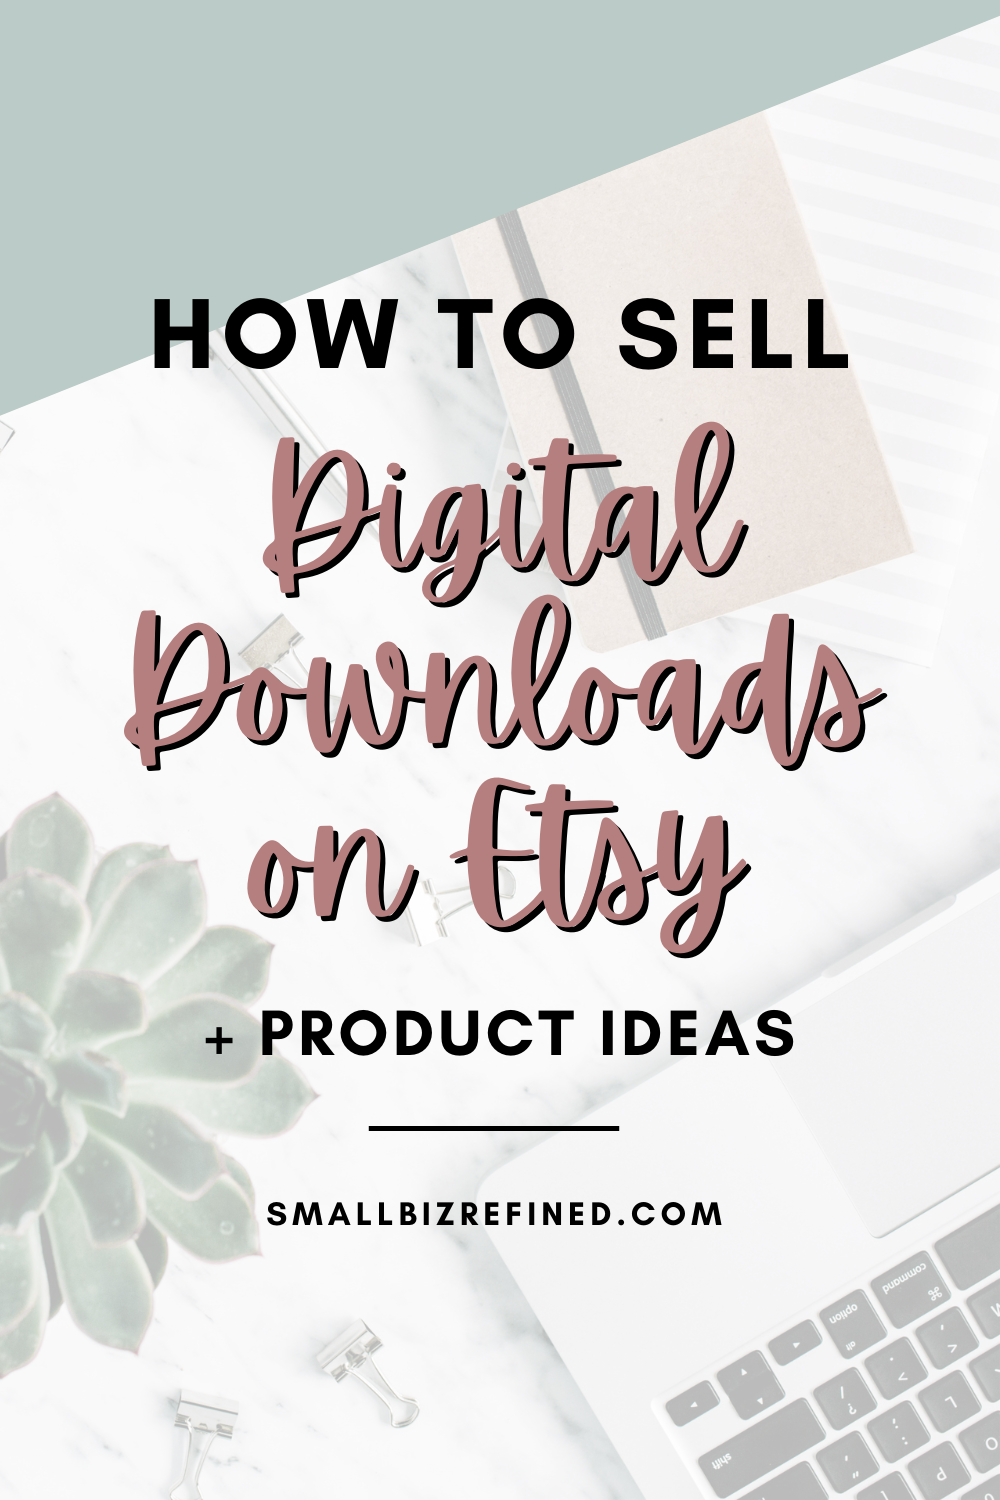 How to Sell Digital Downloads on Etsy | Small Biz Refined